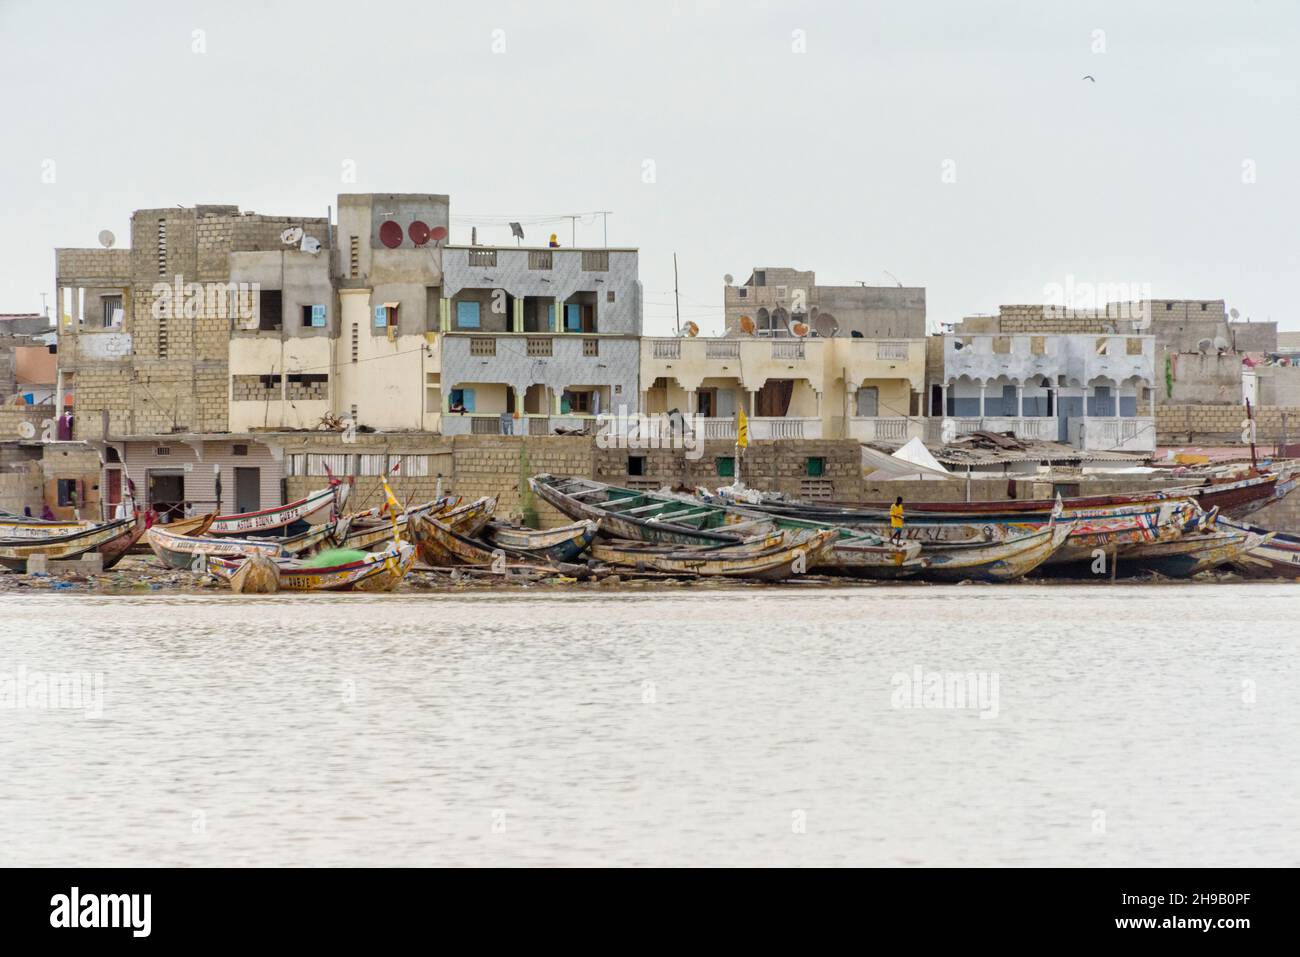 Buildings and boats on the riverbank of Senegal River, Saint-Louis, Senegal Stock Photo